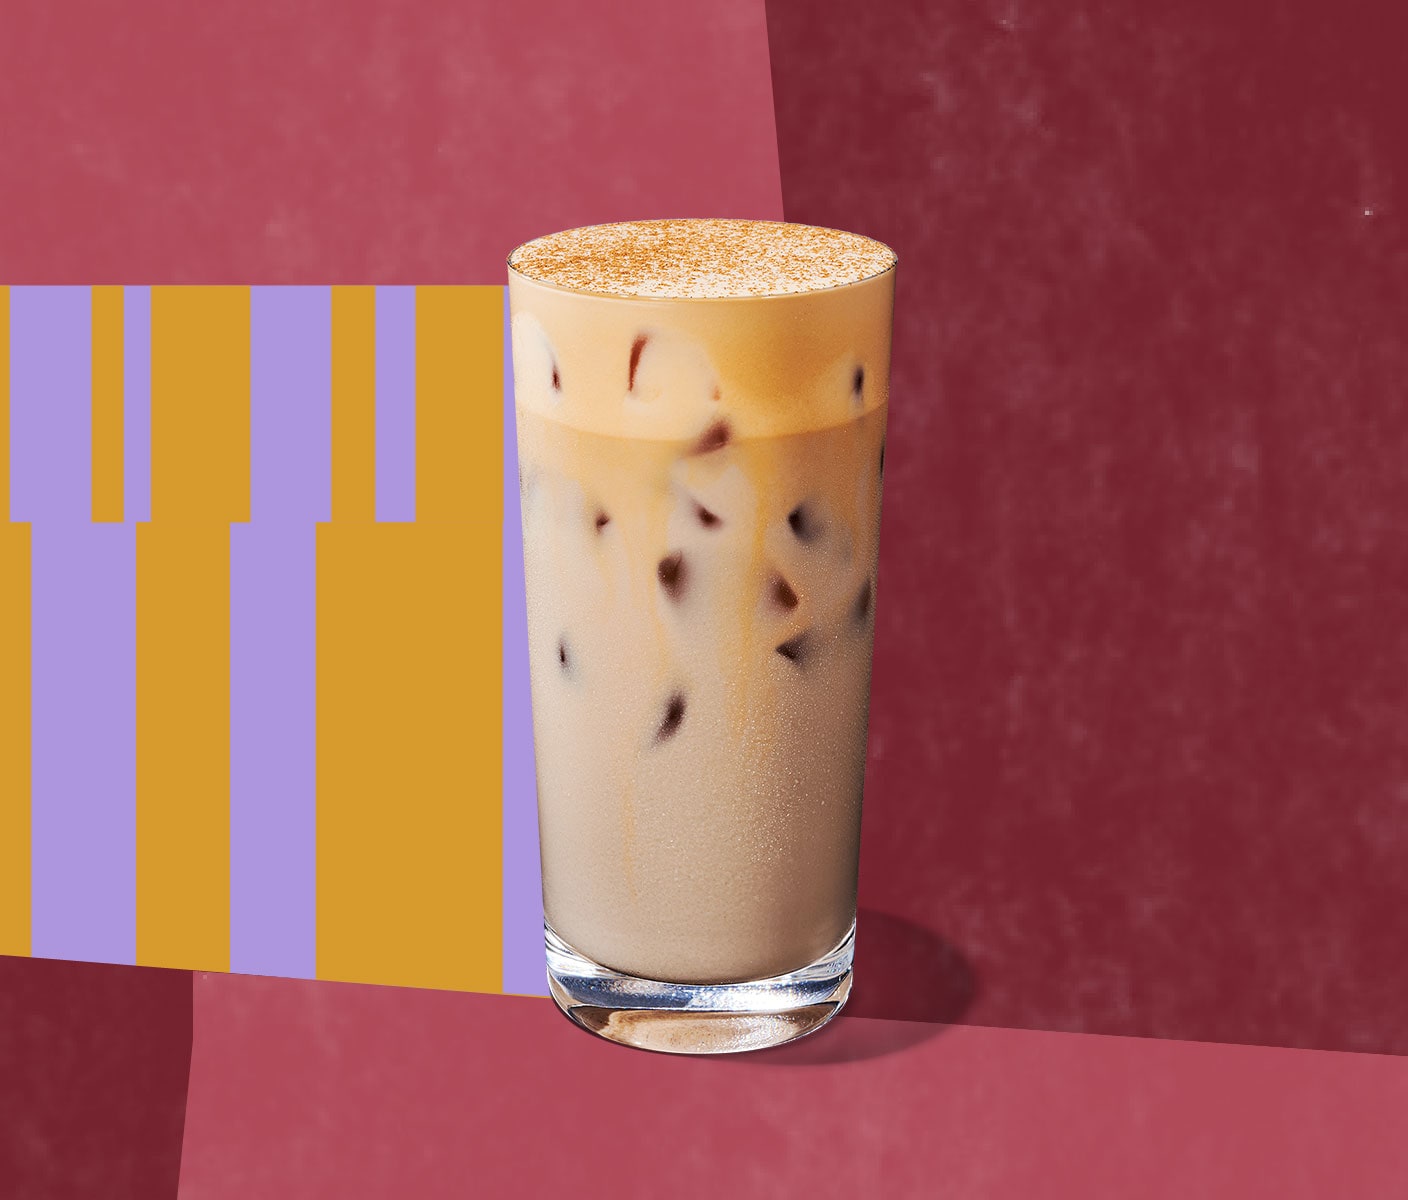 An iced, creamy tea drink with a layer of foaminess in a tall glass.